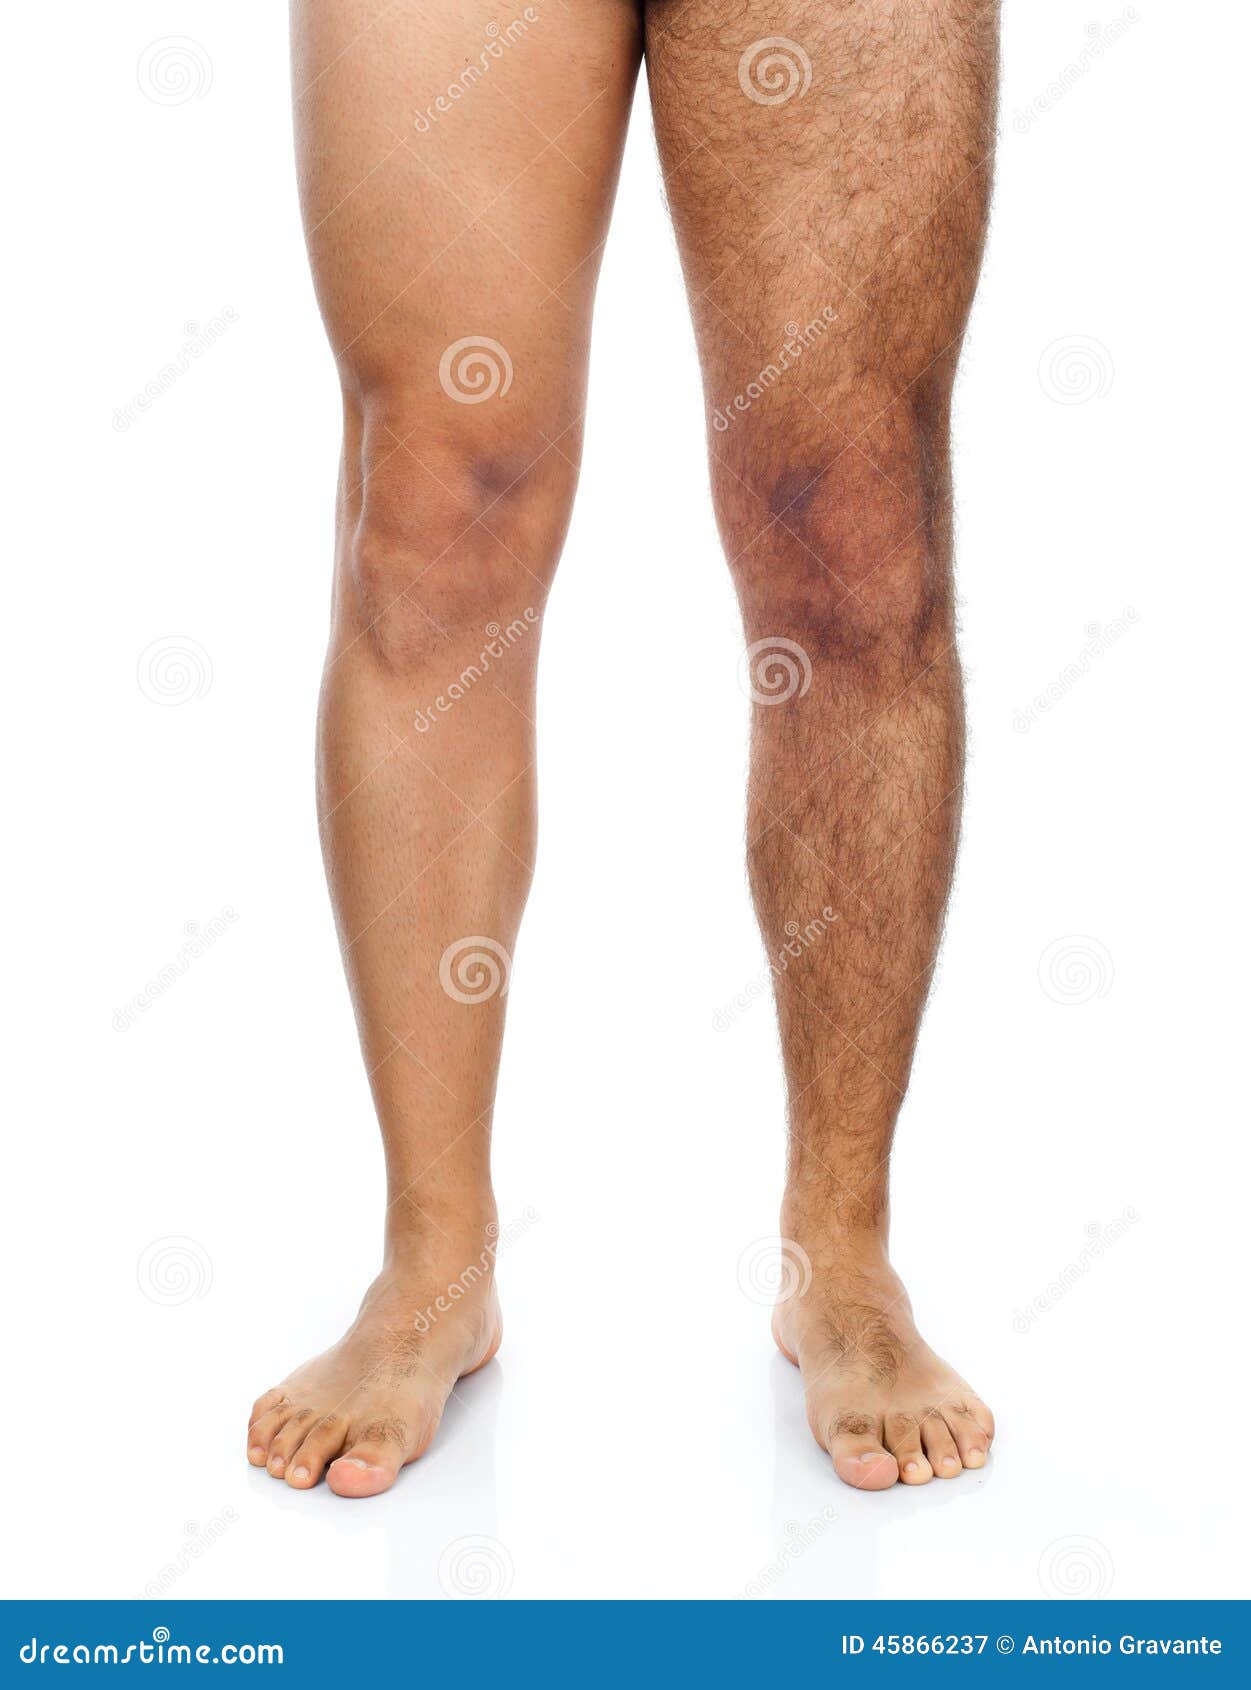 Male hair removal on legs stock image. Image of caucasian - 45866237